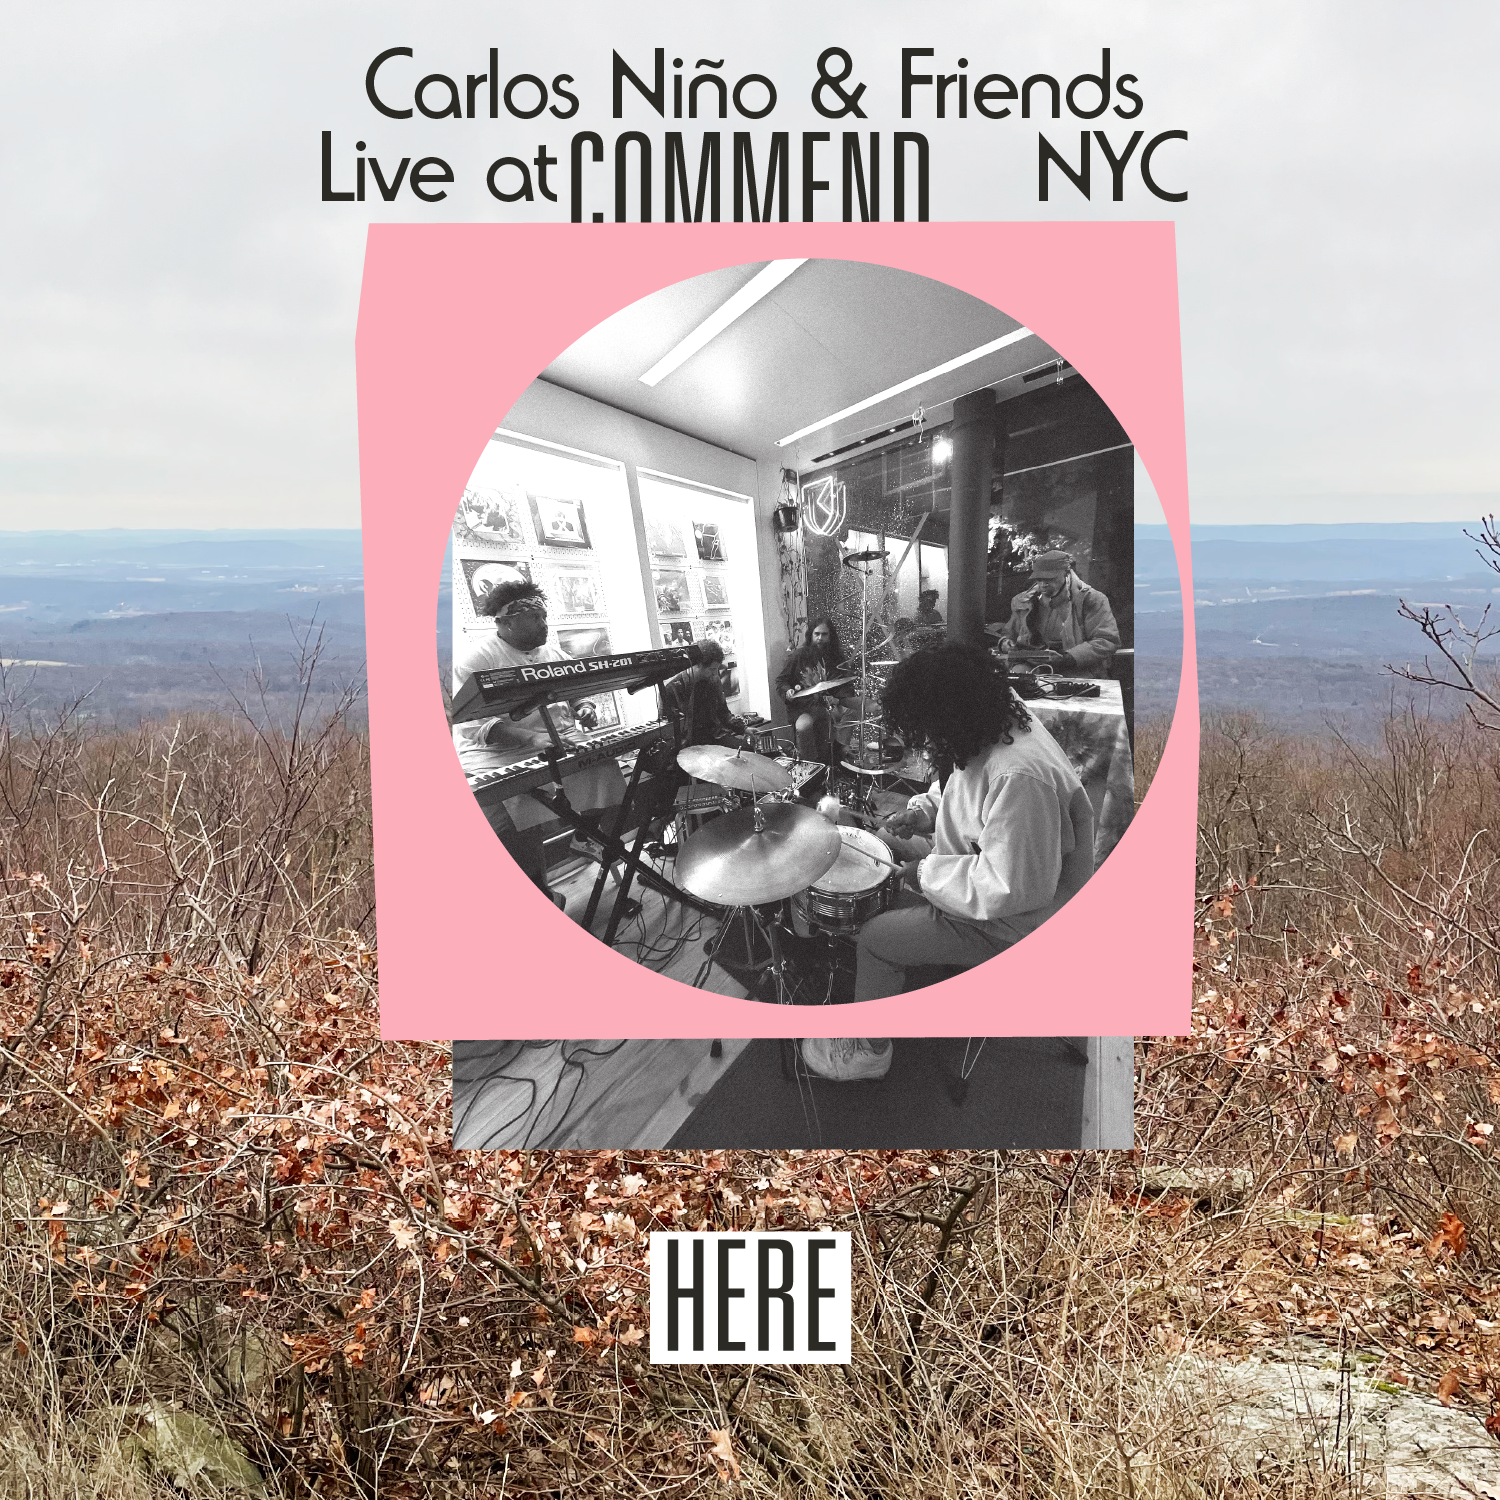 Carlos Niño & Friends – Live at Commend, NYC